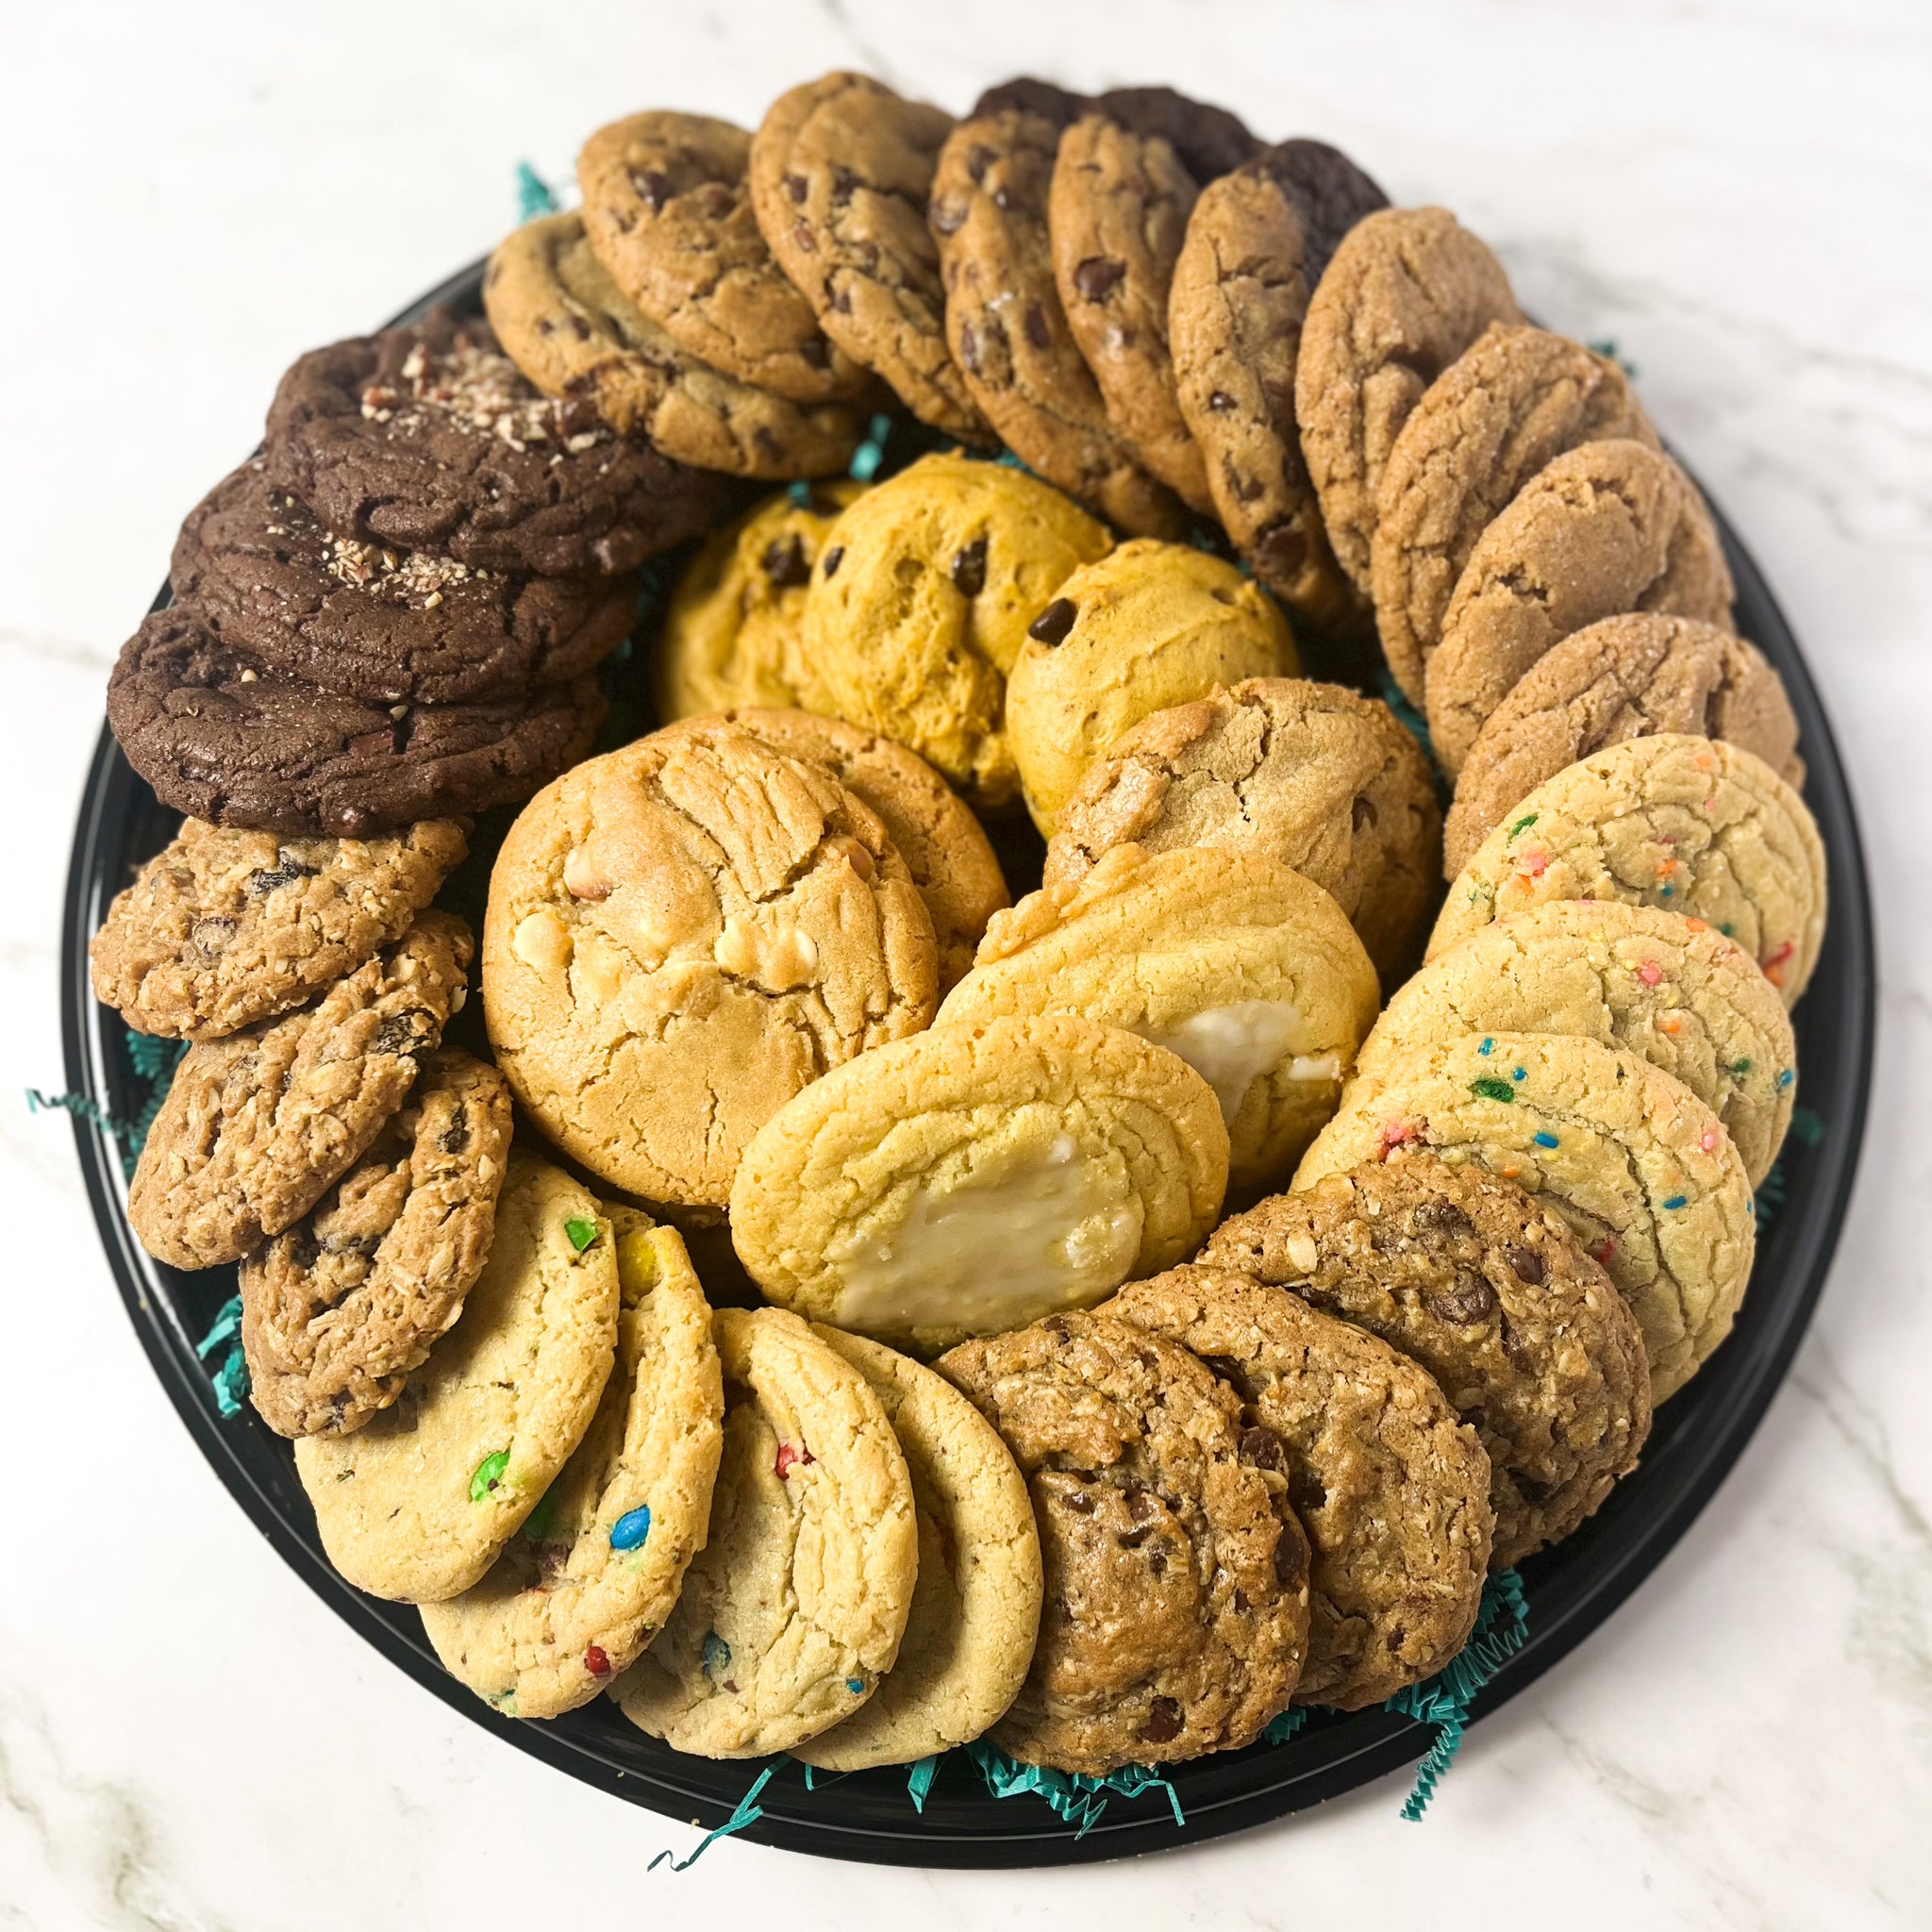 Cookie Catering Tray - St.Patrick's Day